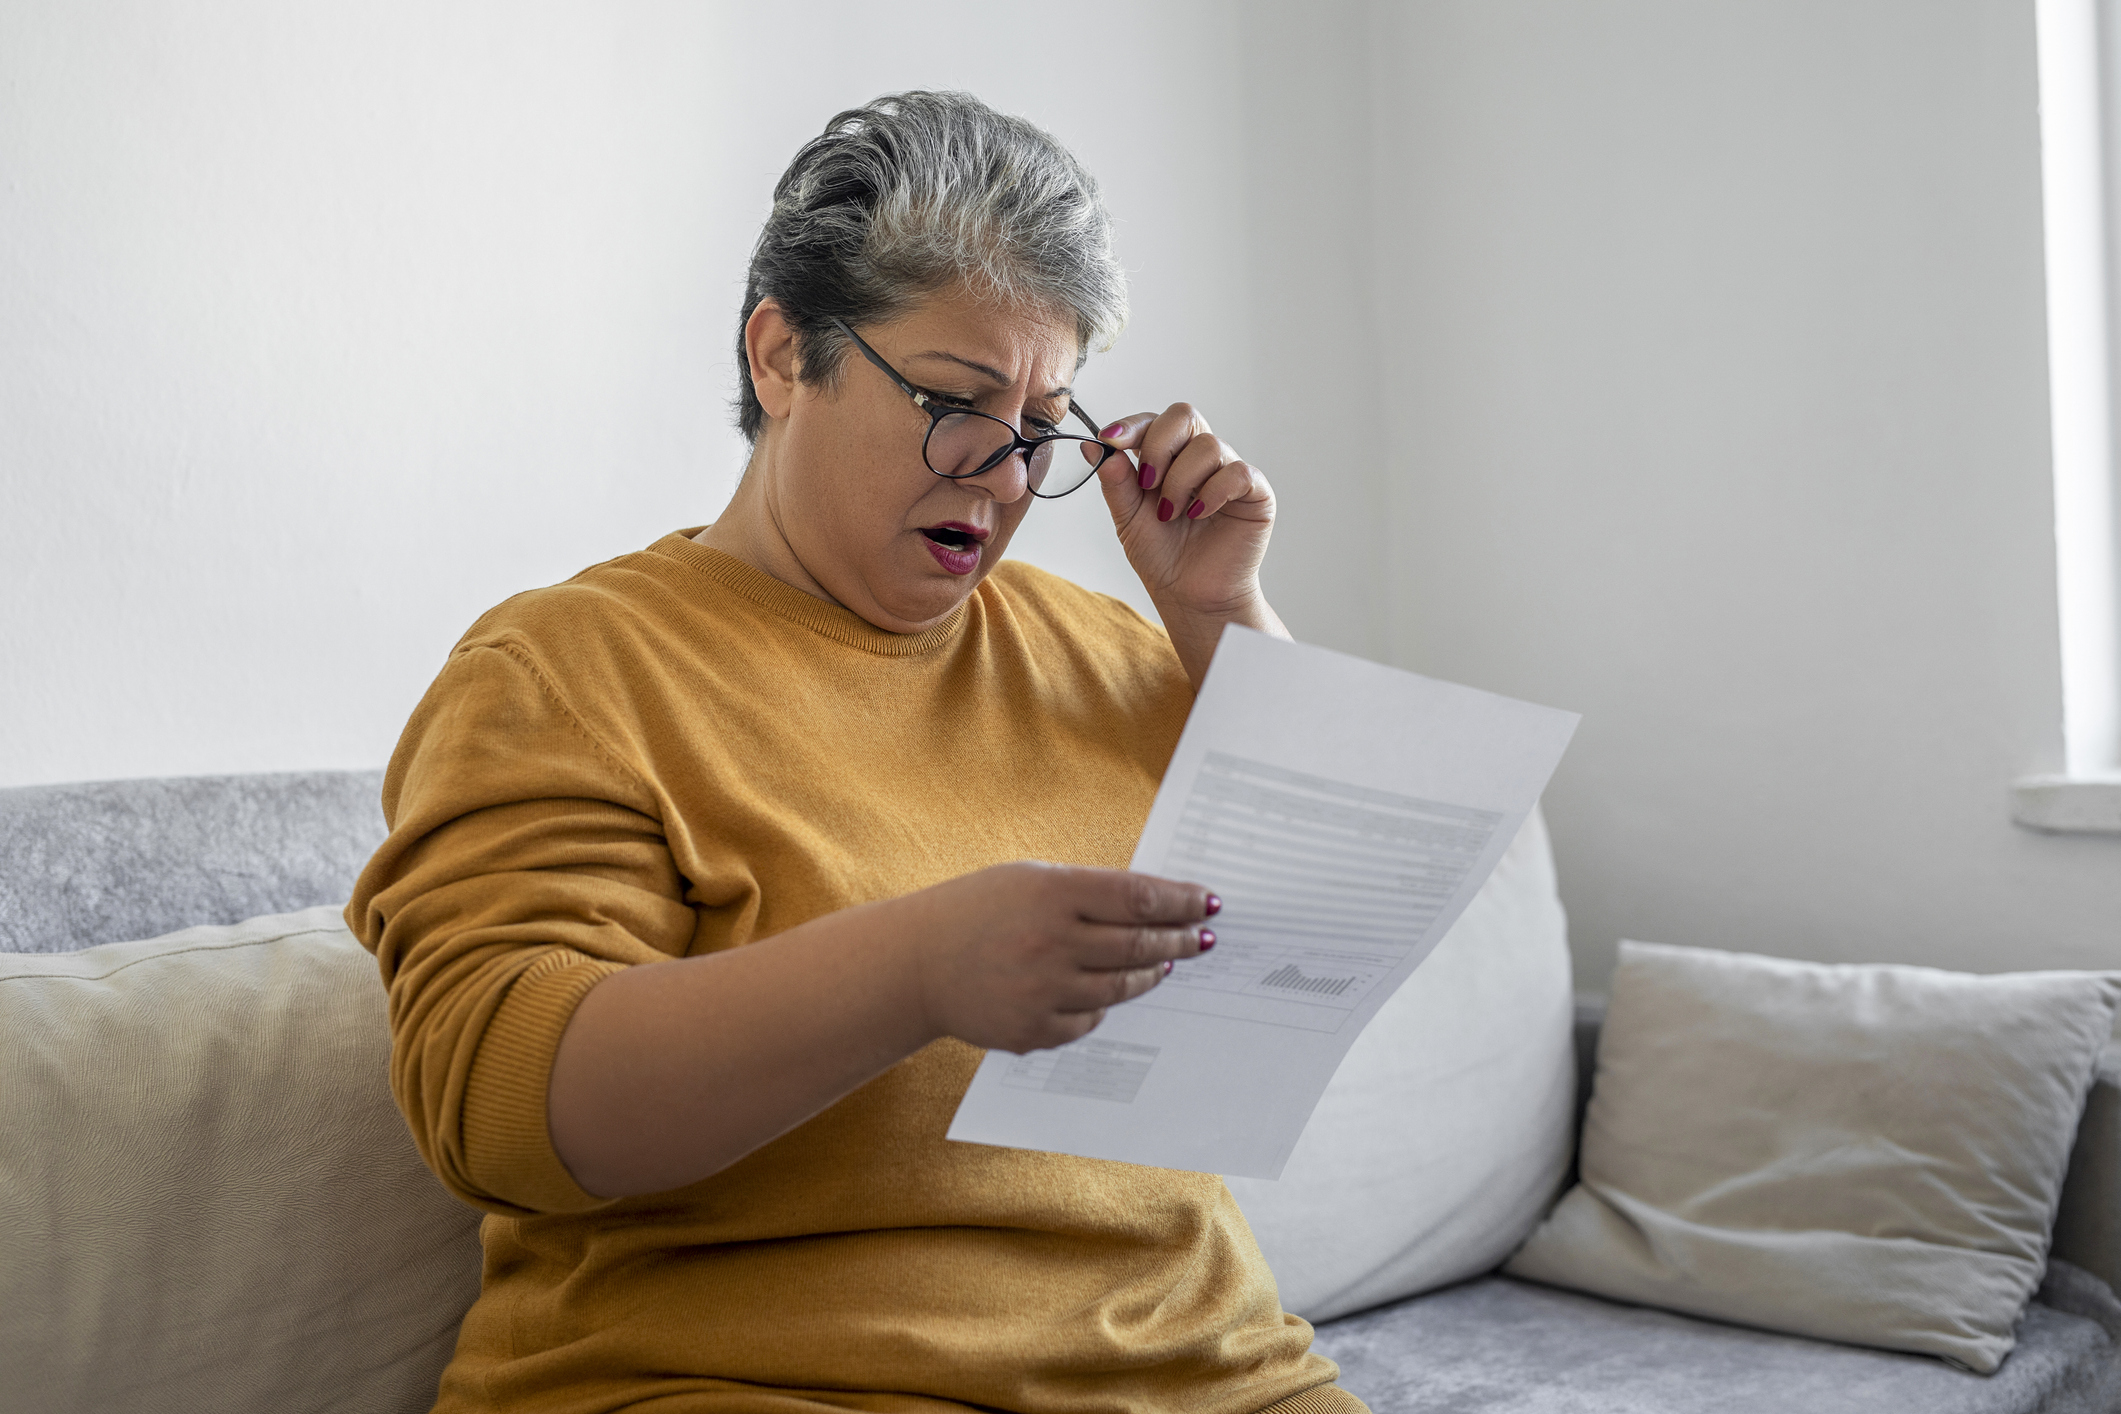 Woman sitting on a couch looking worried whle reading a letter